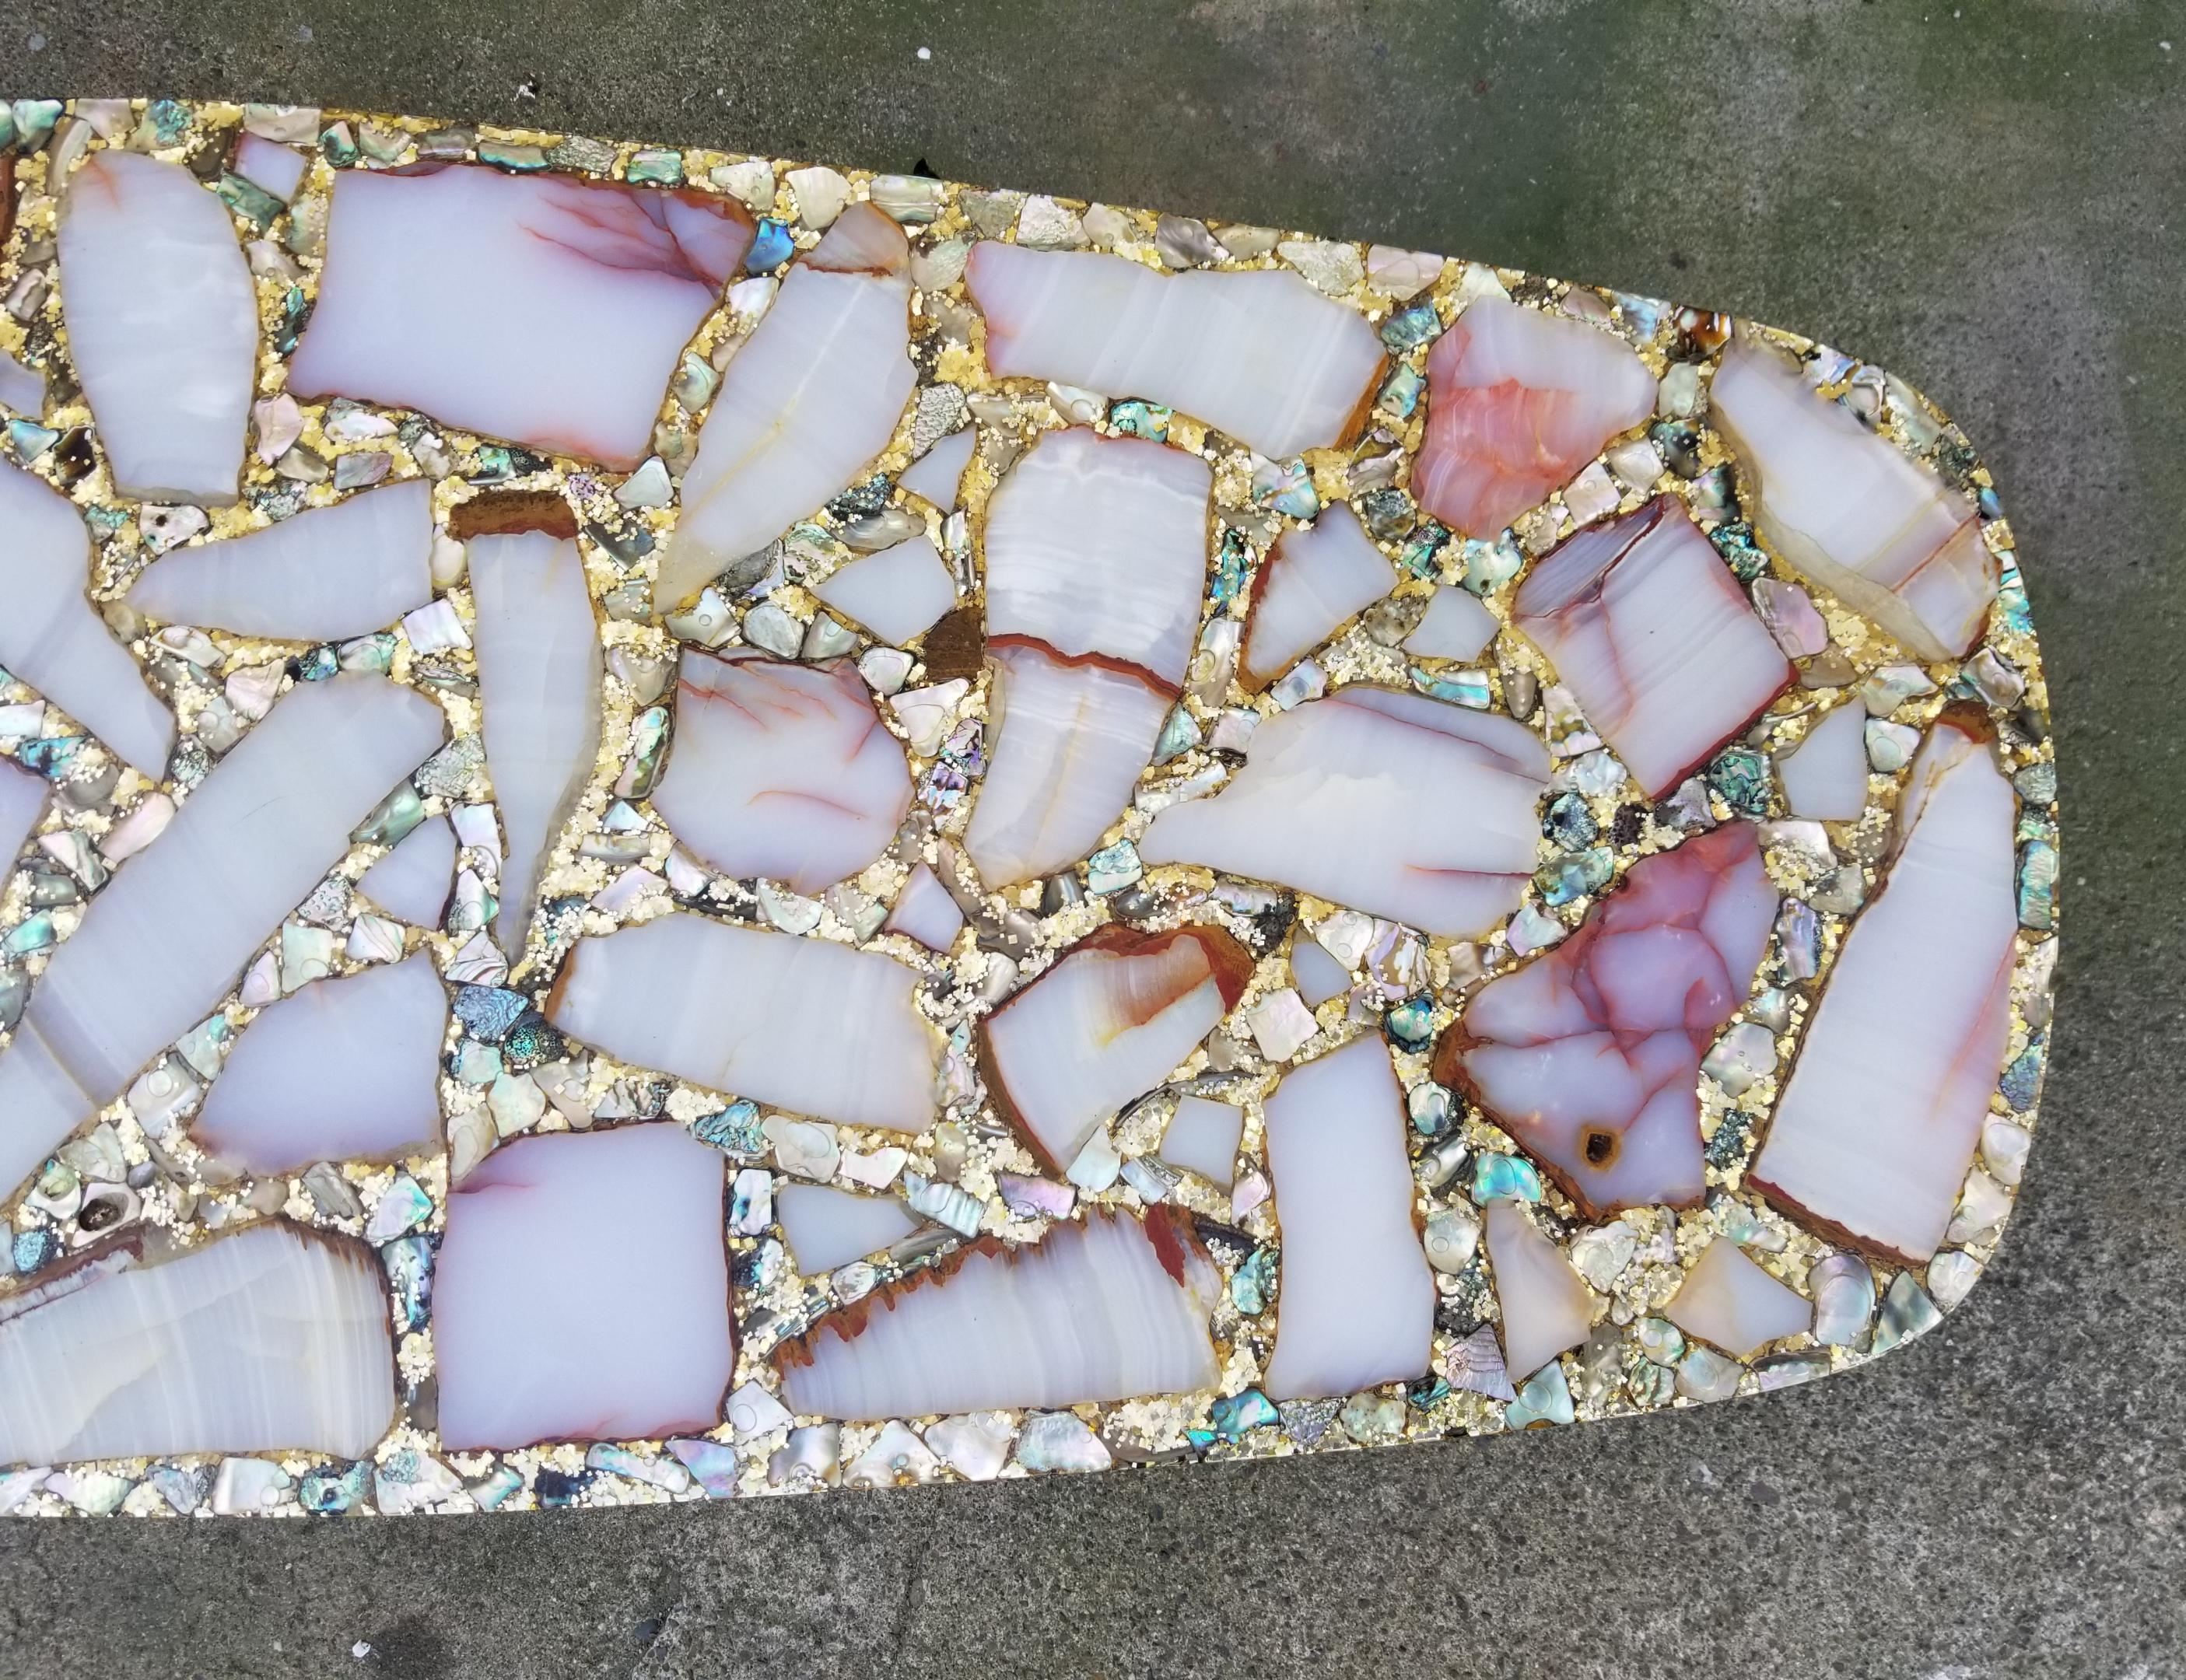 Extraordinary Arturo Pani Hollywood Regency coffee table comprised of onyx stone, abalone shell, gold glitter and resin. Attention grabbing glamorous table making a statement to any interior. Excellent original condition.